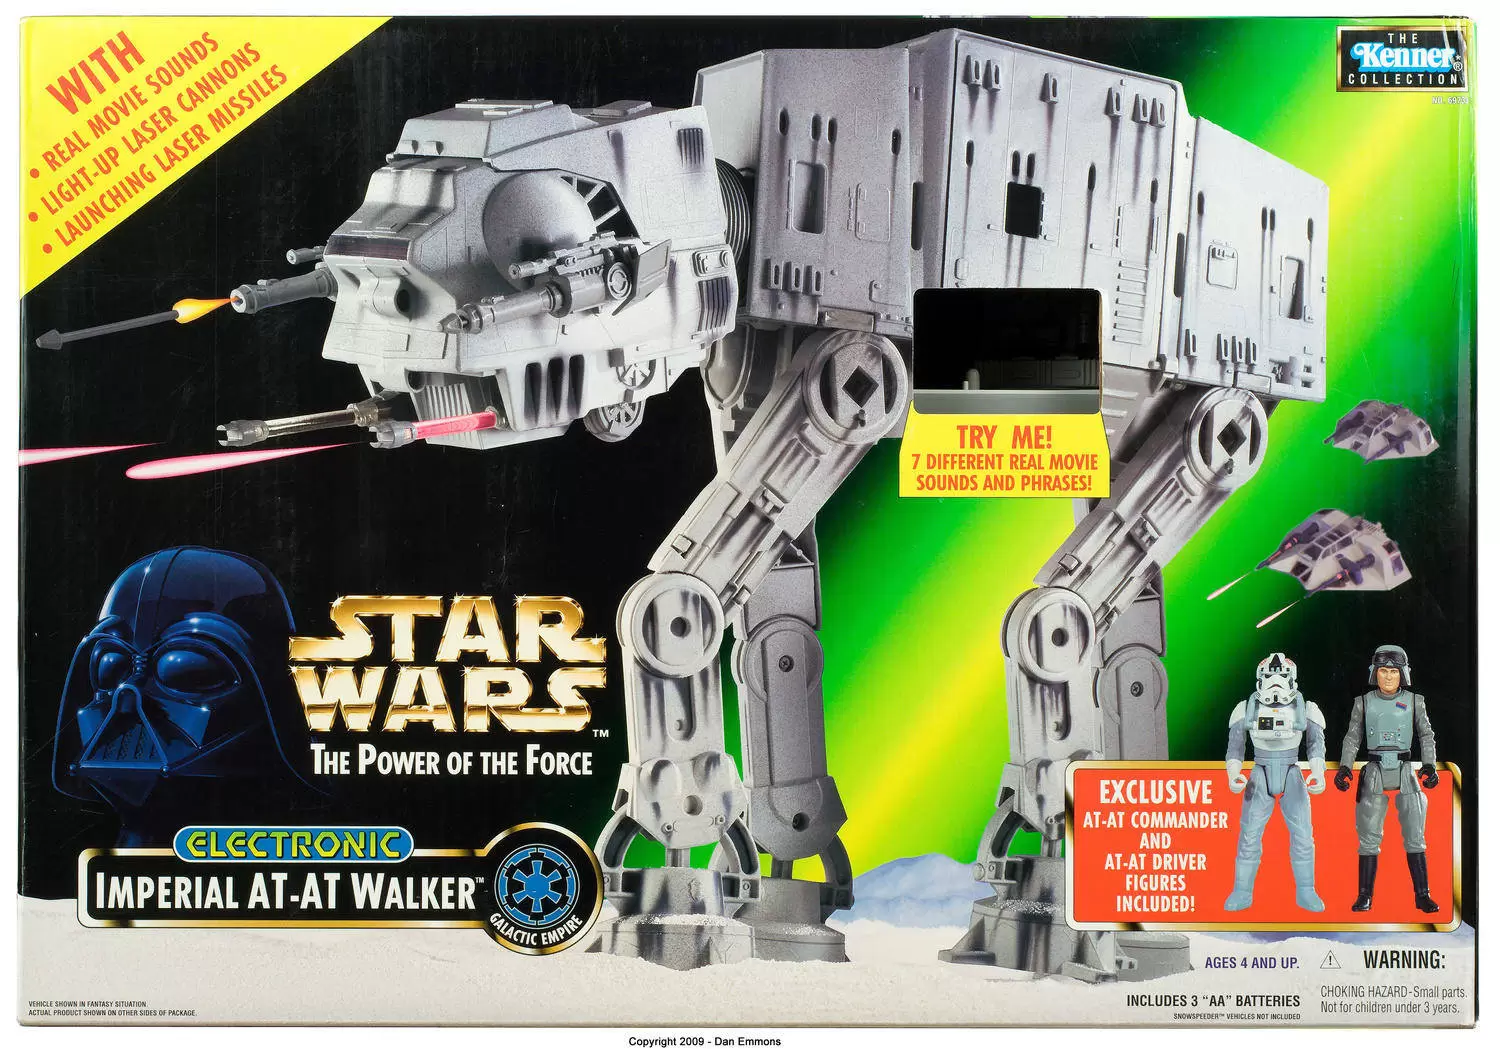 Power of the Force 2 - Electronic Imperial AT-AT Walker